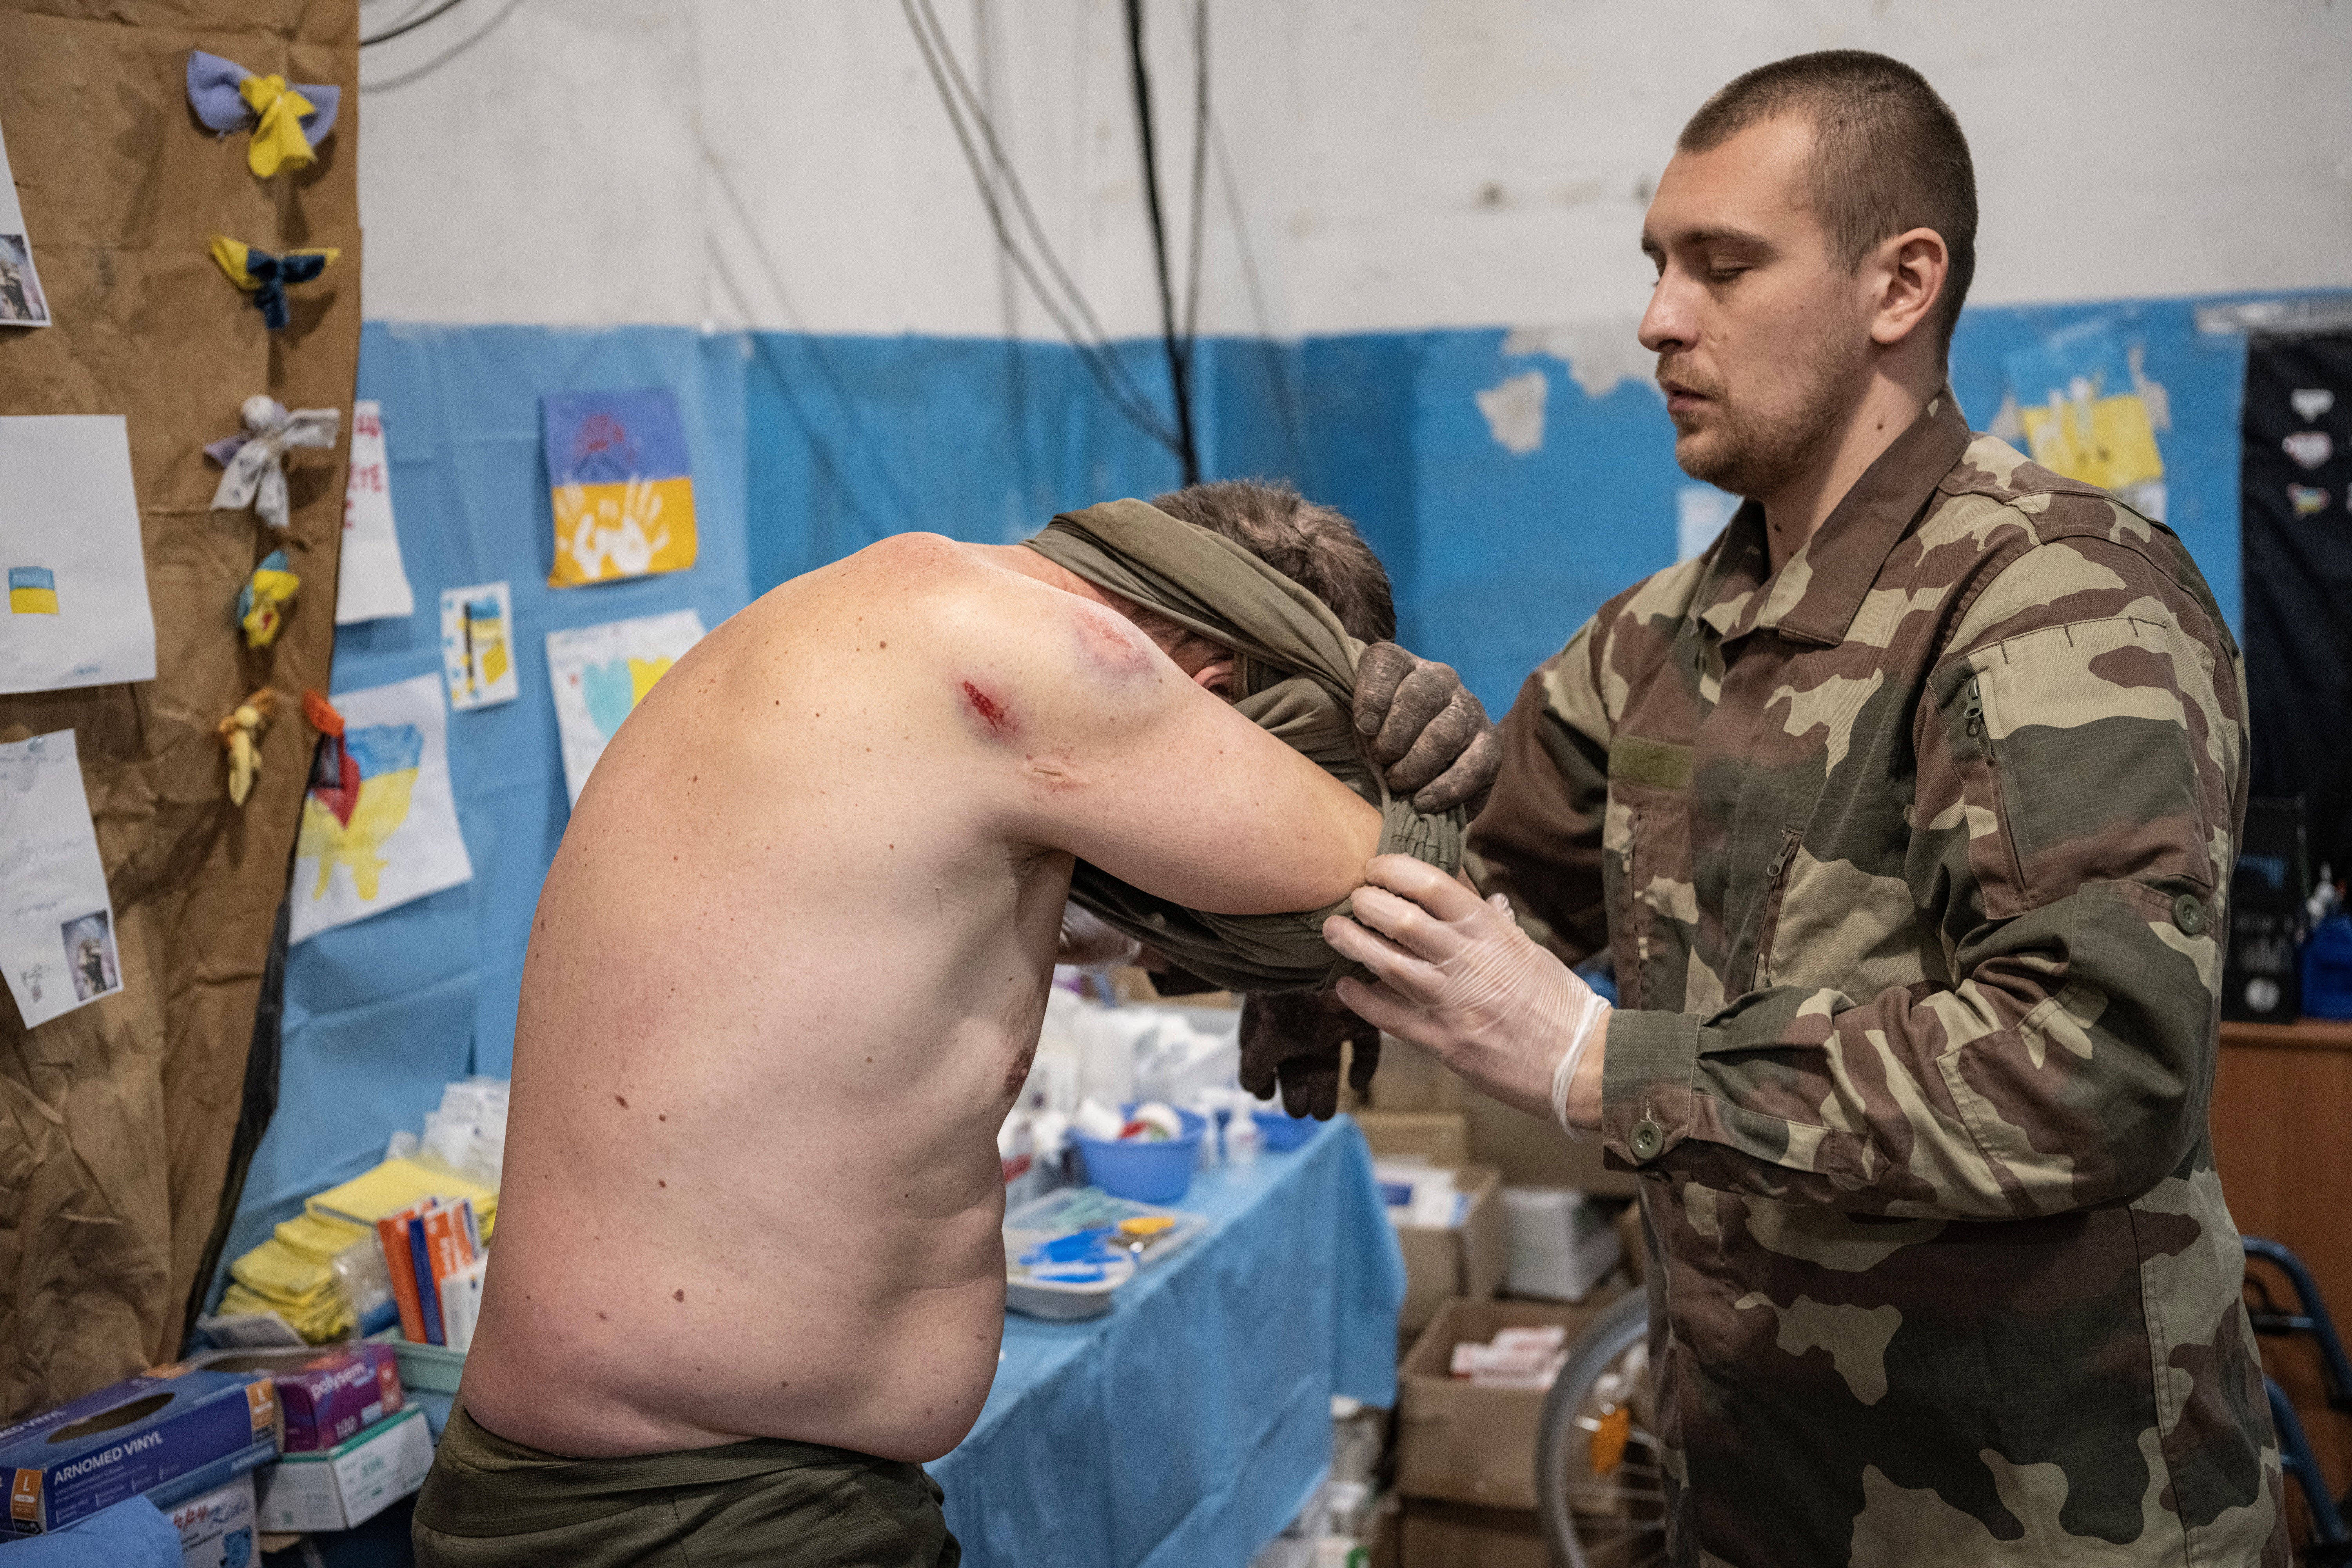 Volodymyr assists a wounded soldier